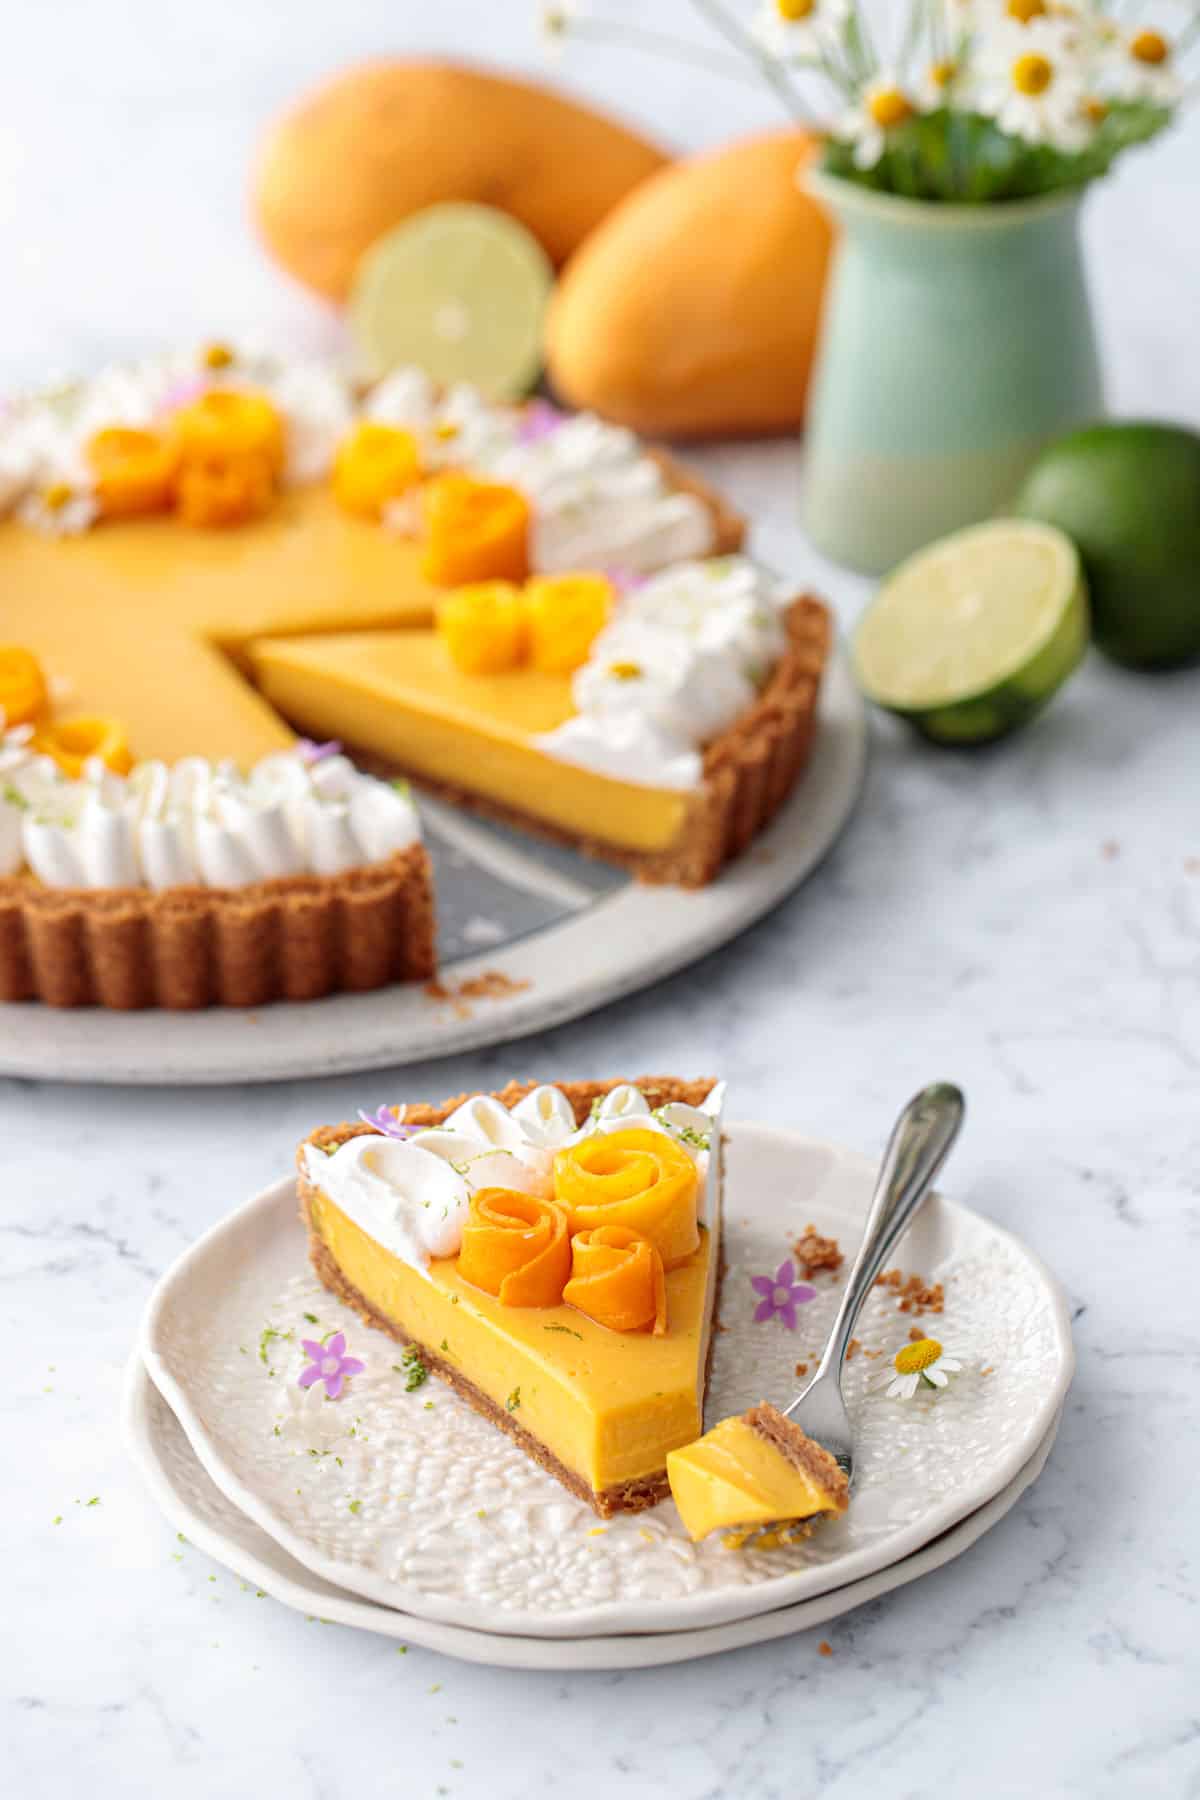 Slice of Mango Lime Tart on a white plate, with the full tart, vase of flowers, plus whole mangos and limes in the background.